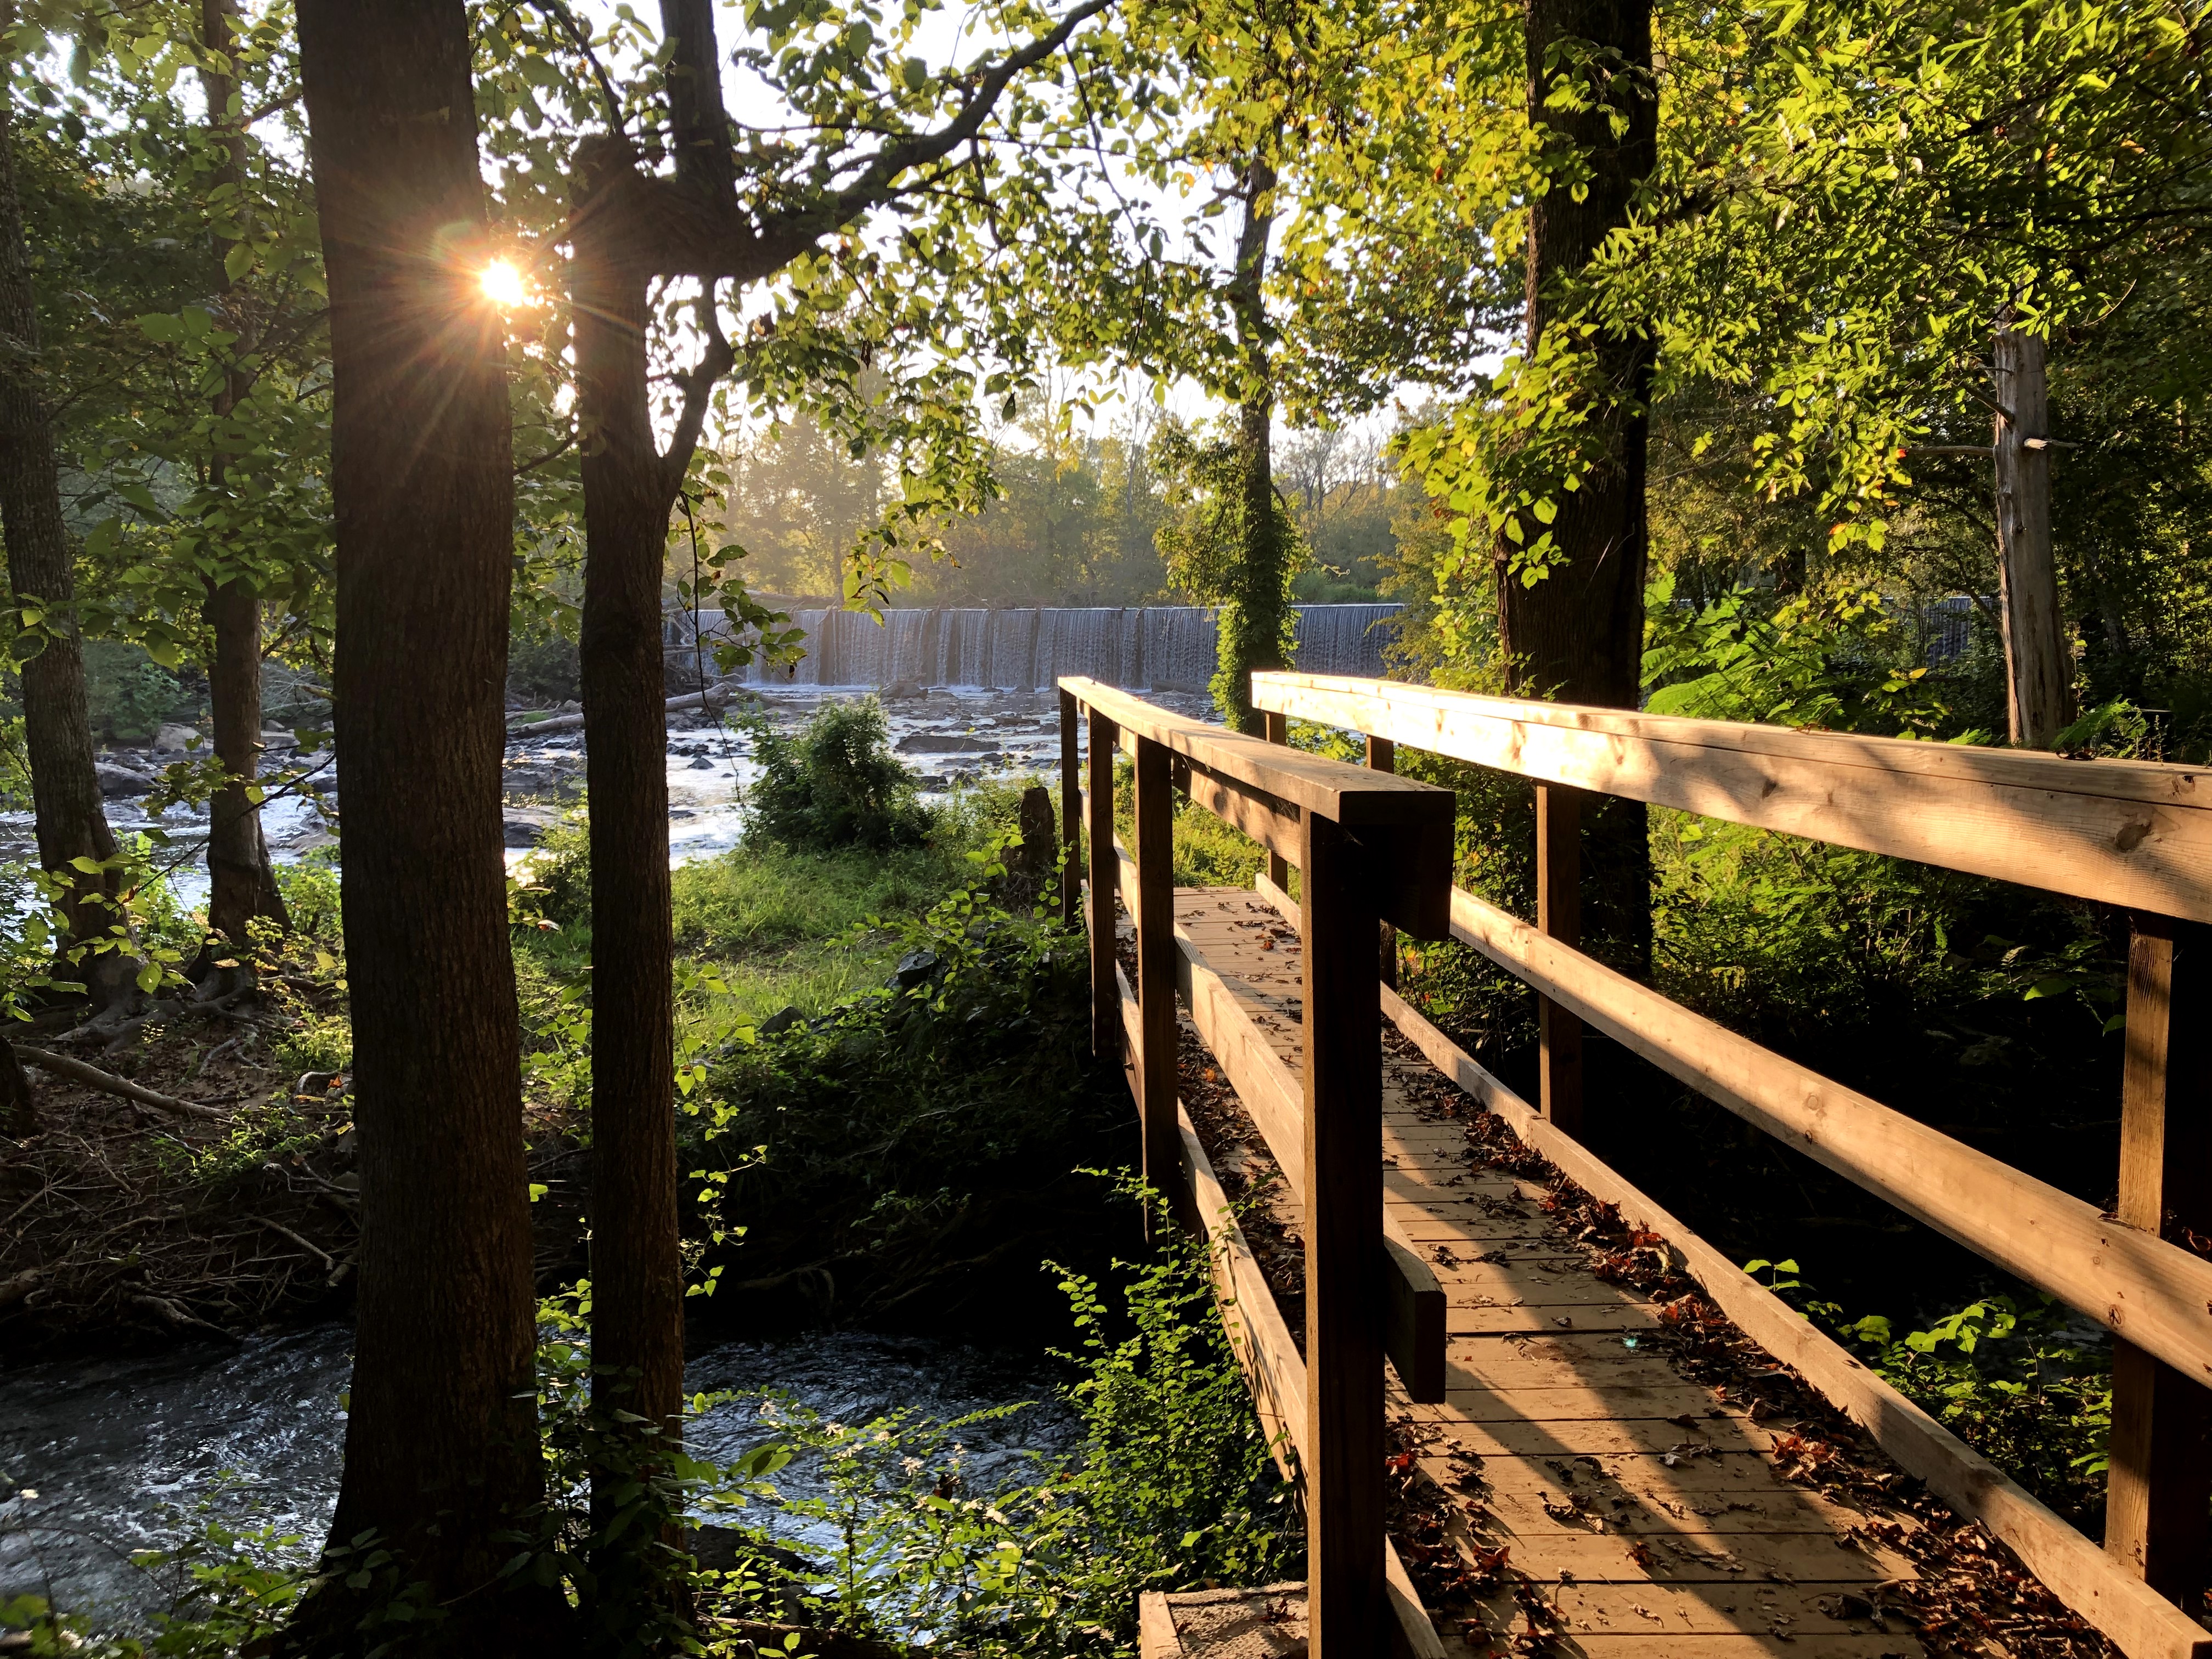 Photograph of a bridge along the Glencoe Haw River trail facing the dam and river